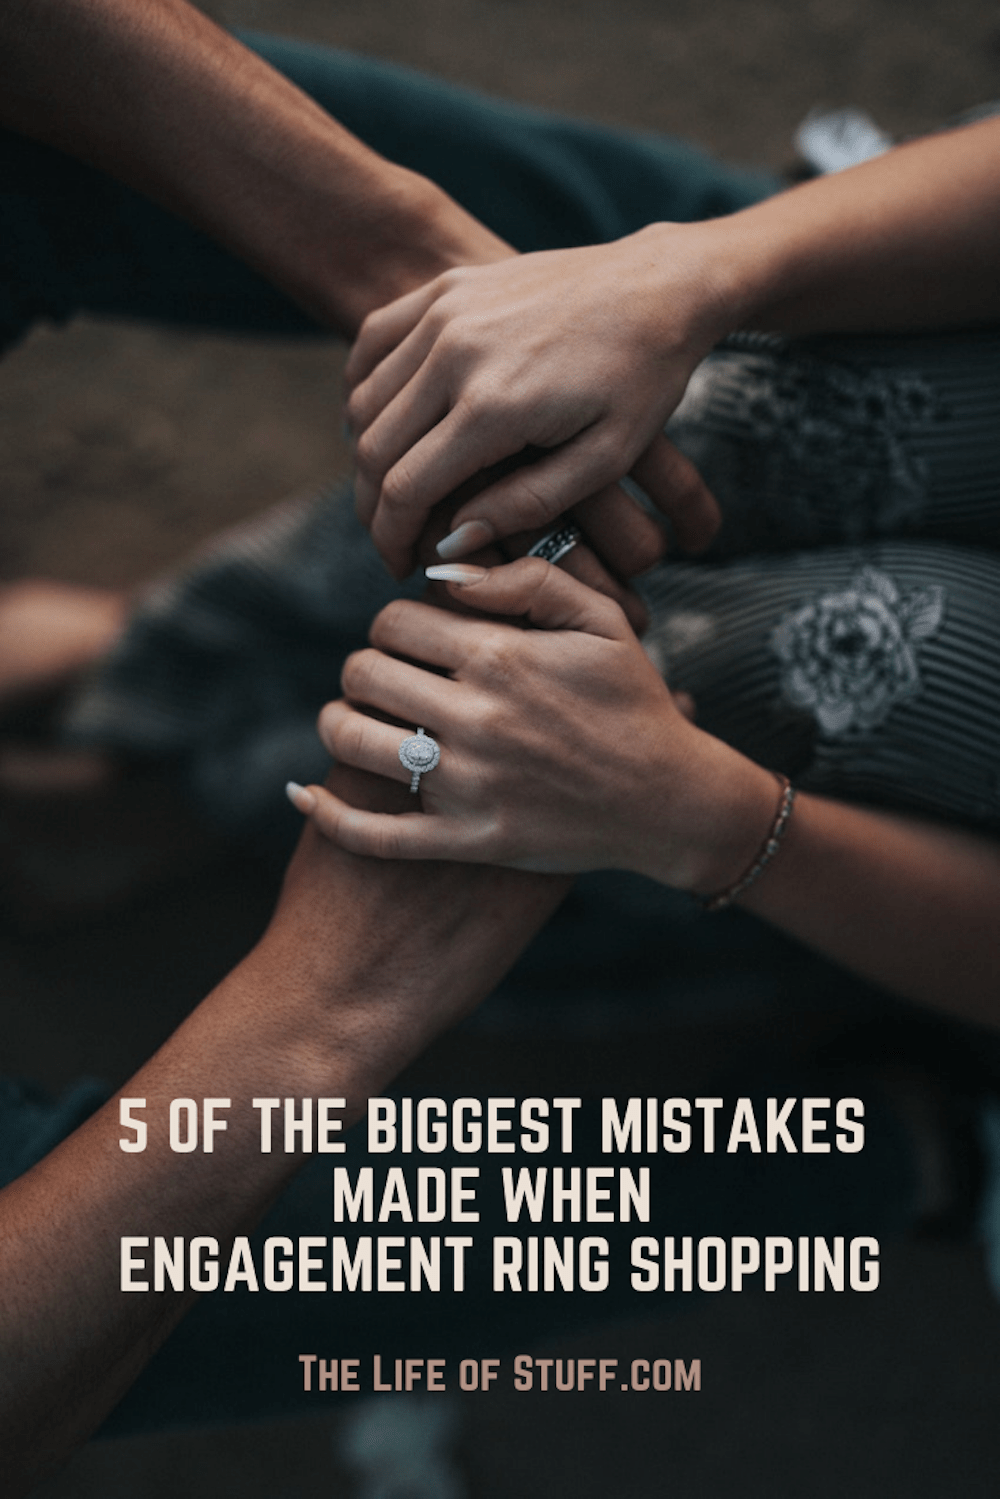 5 Biggest Mistakes Made When Engagement Ring Shopping - The Life of Stuff